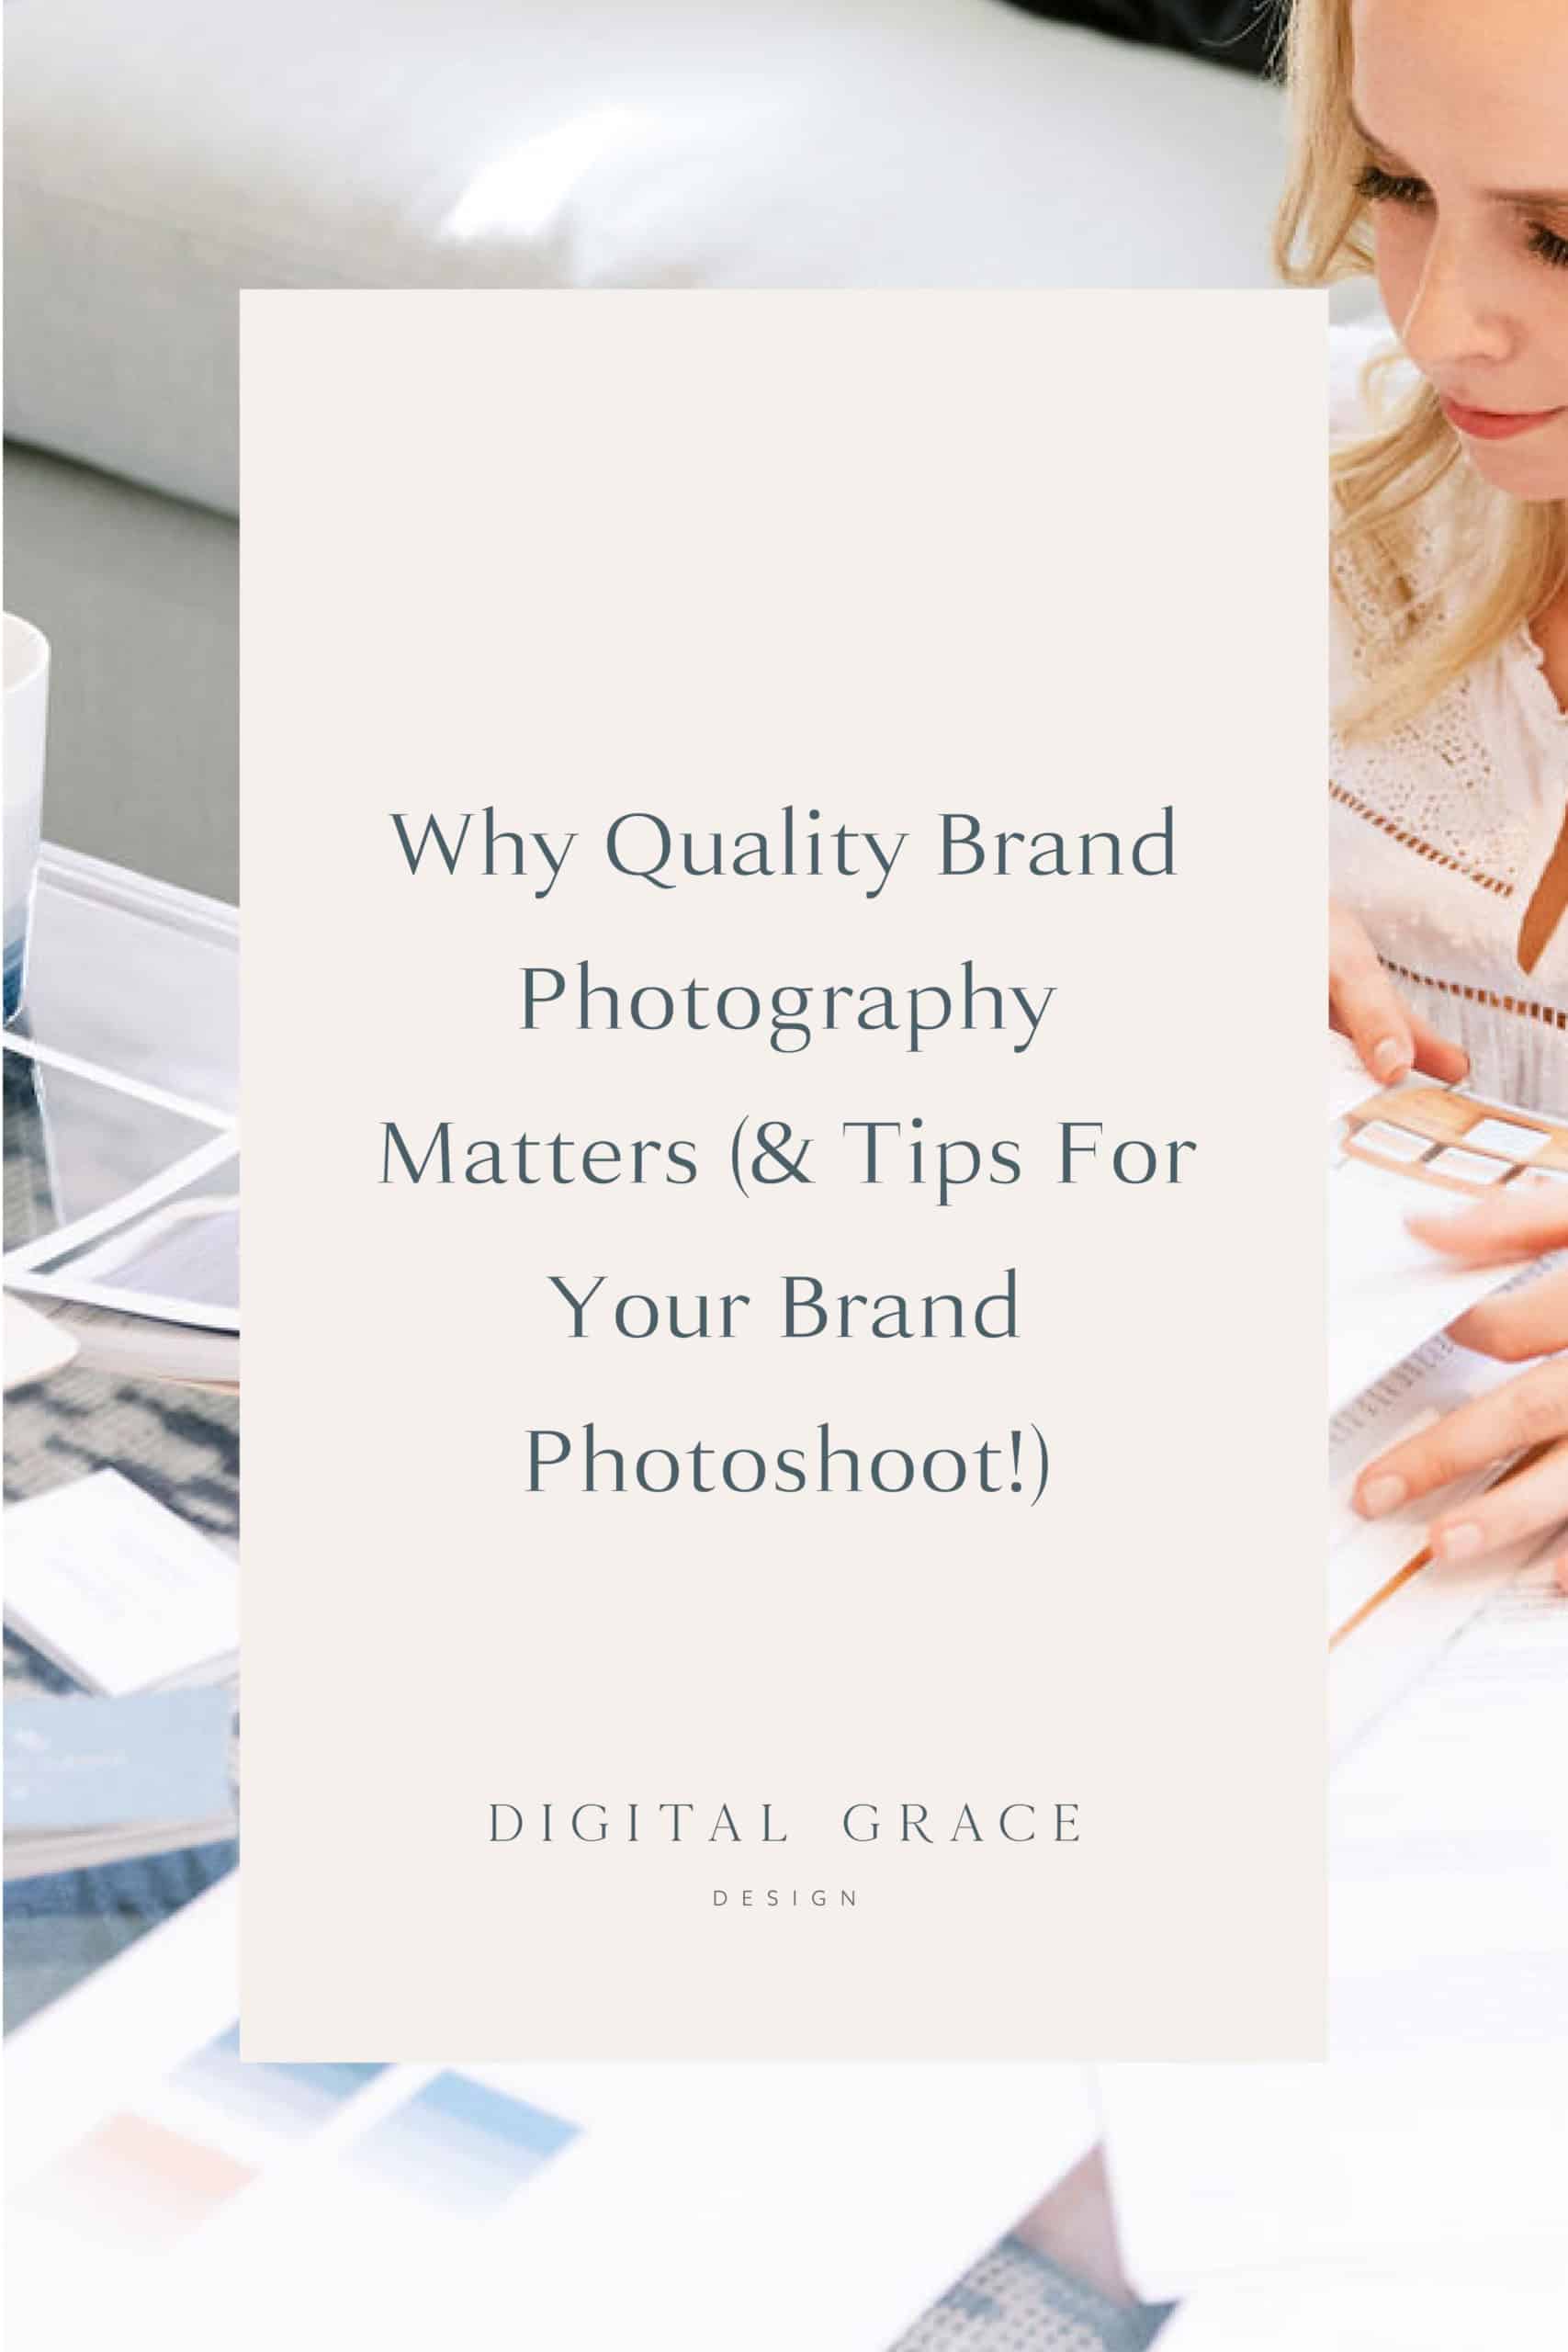 Why Quality Brand Photography Matters and Tips for Your Brand Photoshoot